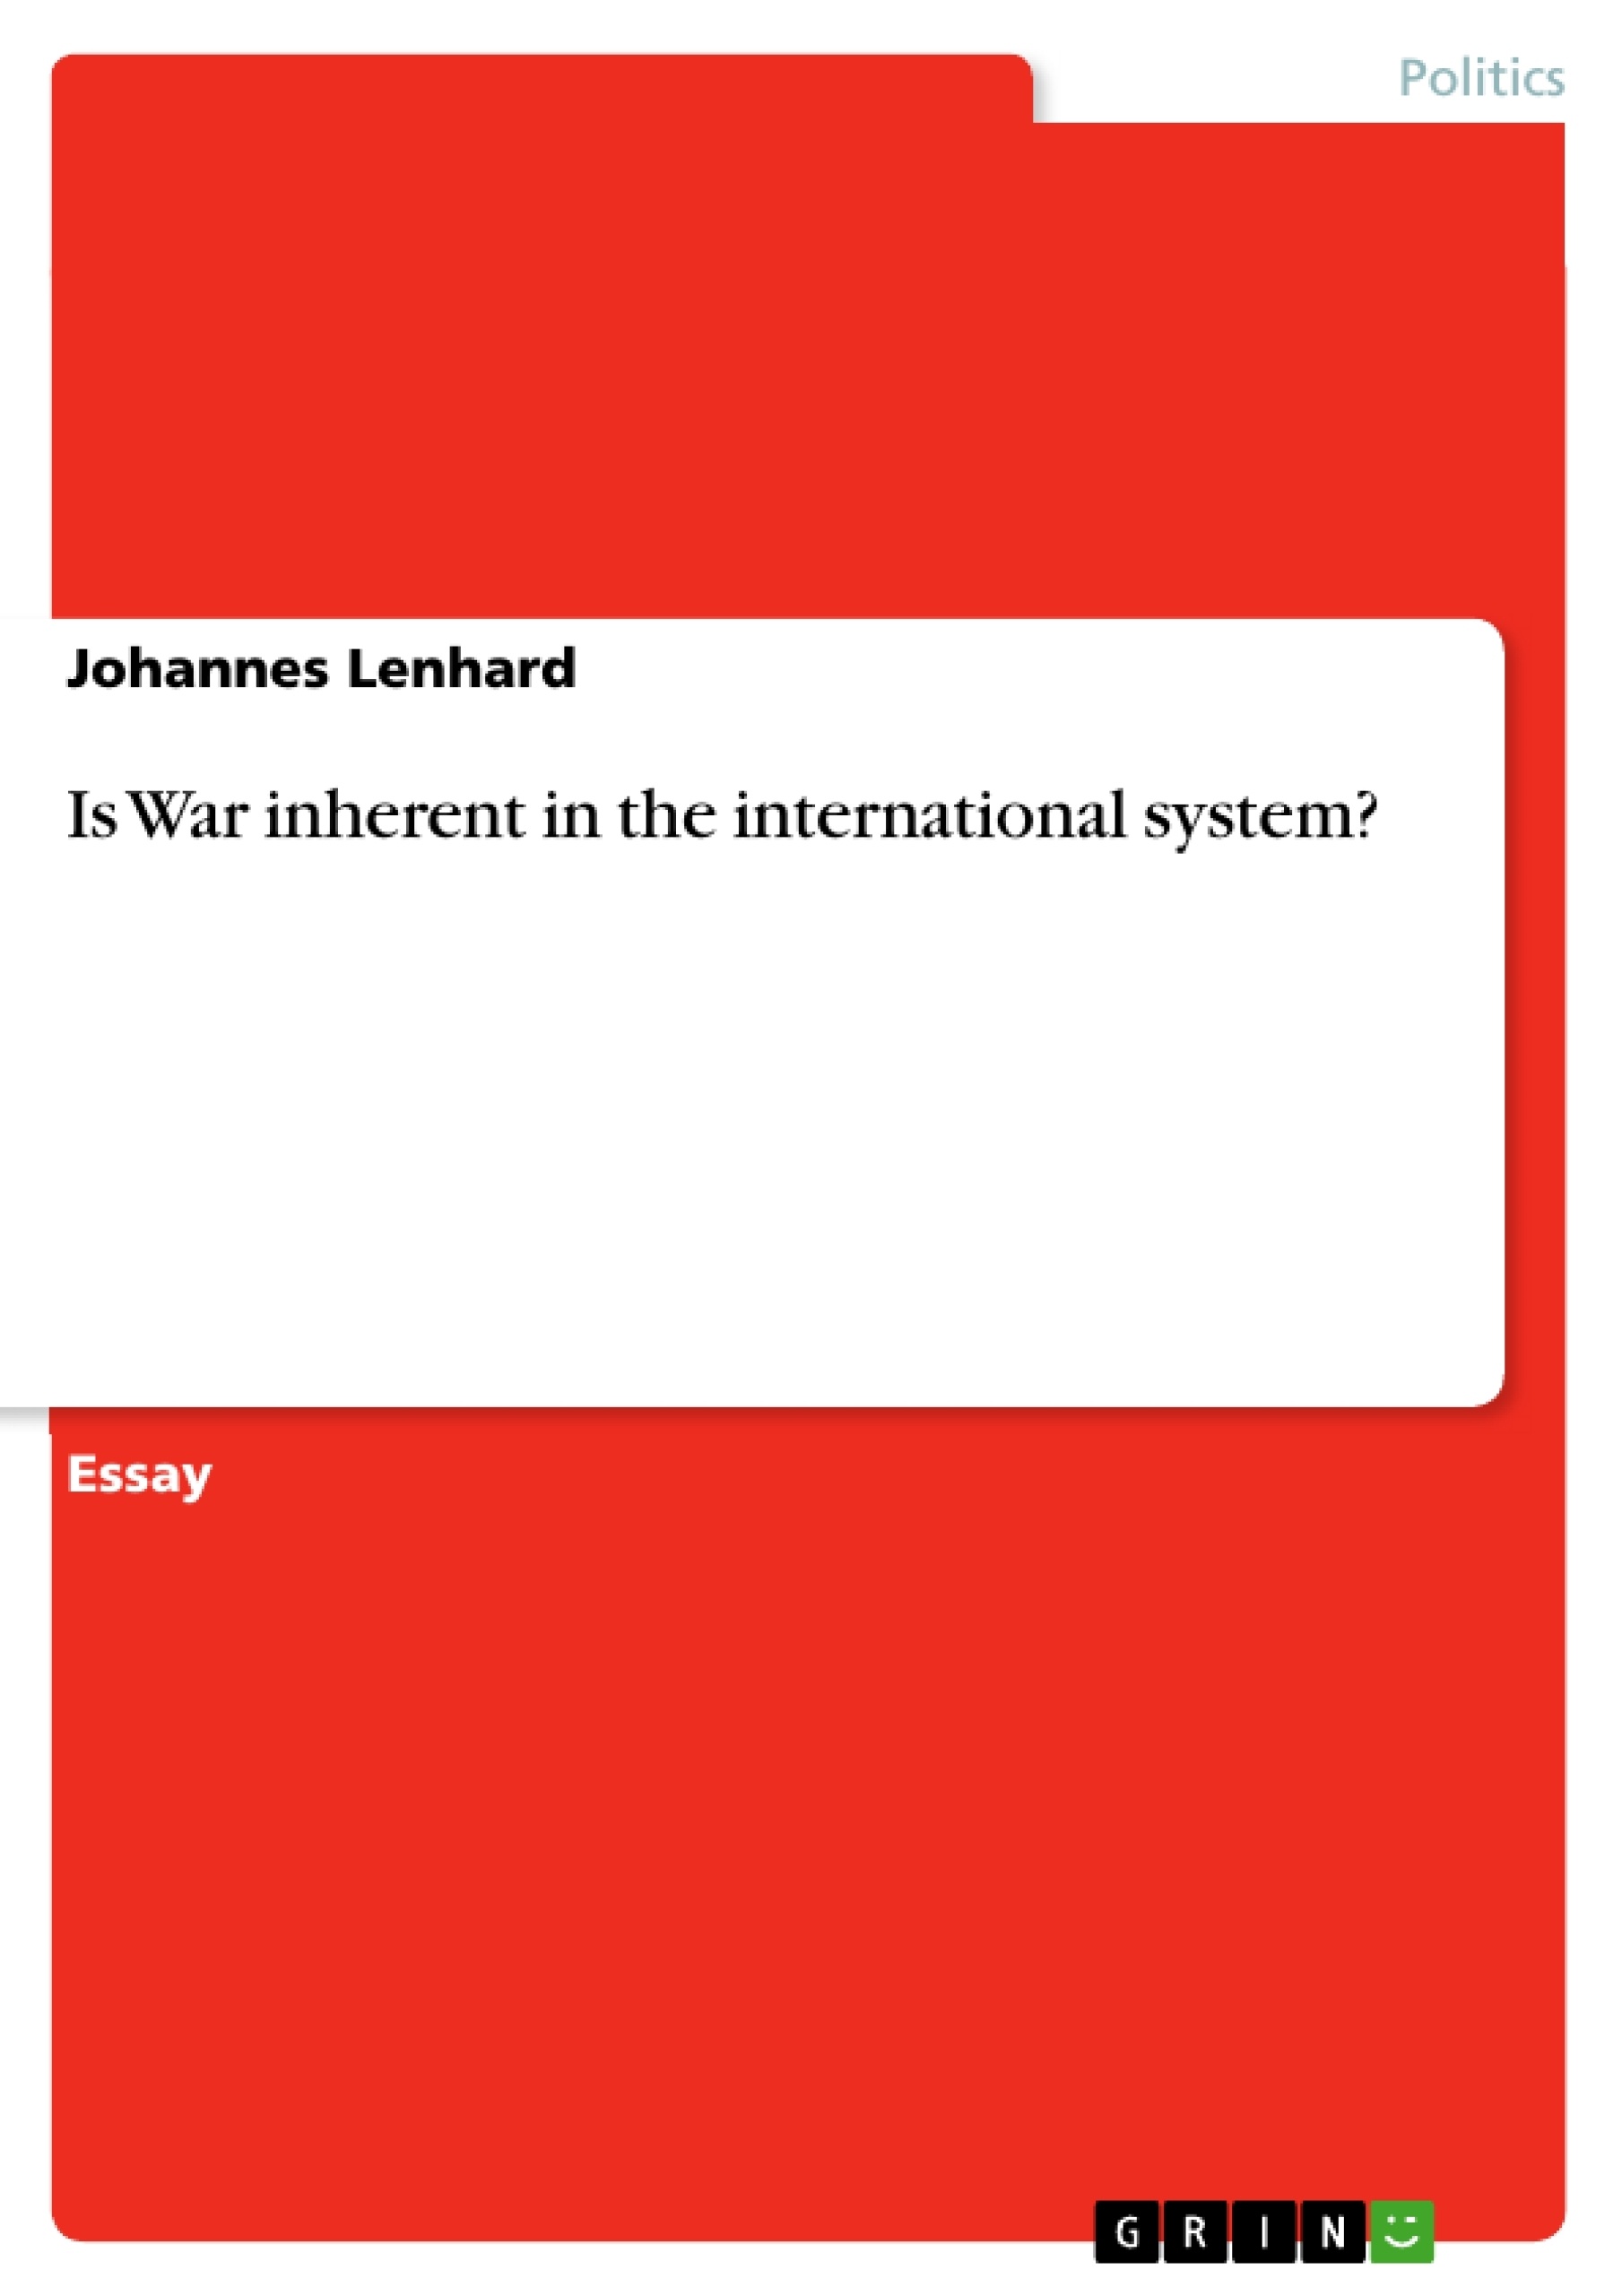 Title: Is War inherent in the international system?